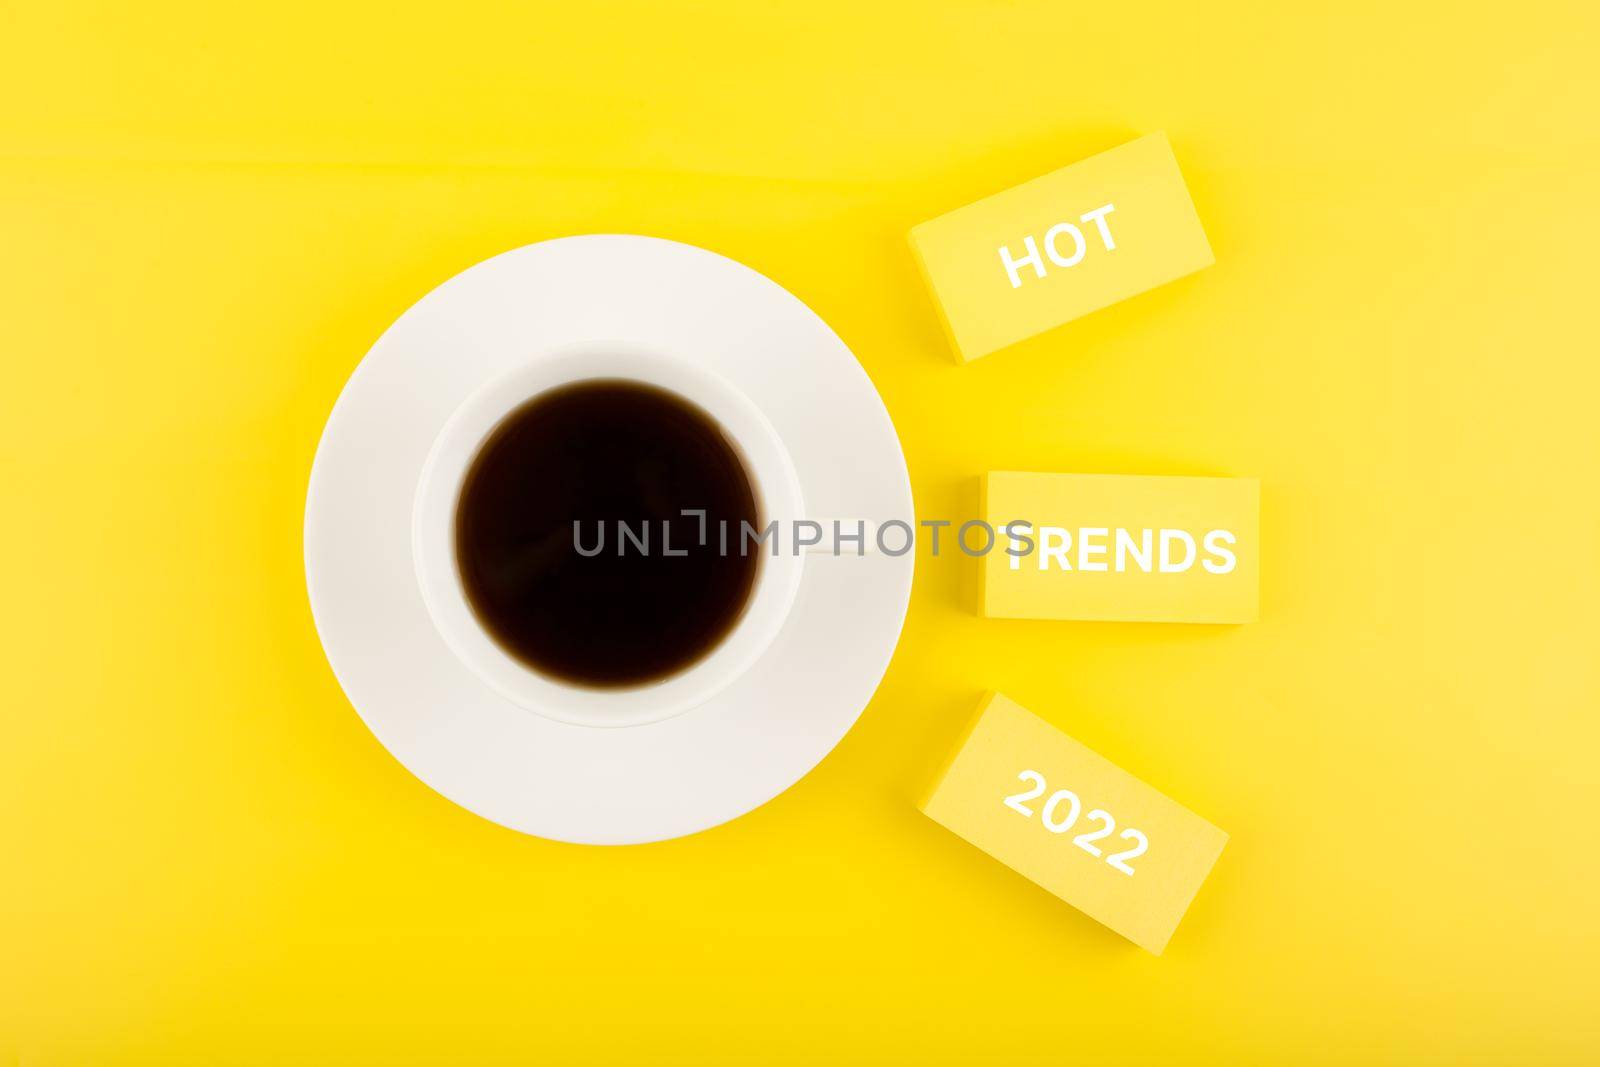 Hot trends 2022 written on rectangles next to cup of coffee on bright yellow background. Concept of newest, latest, hot and popular trends of upcoming 2022 year